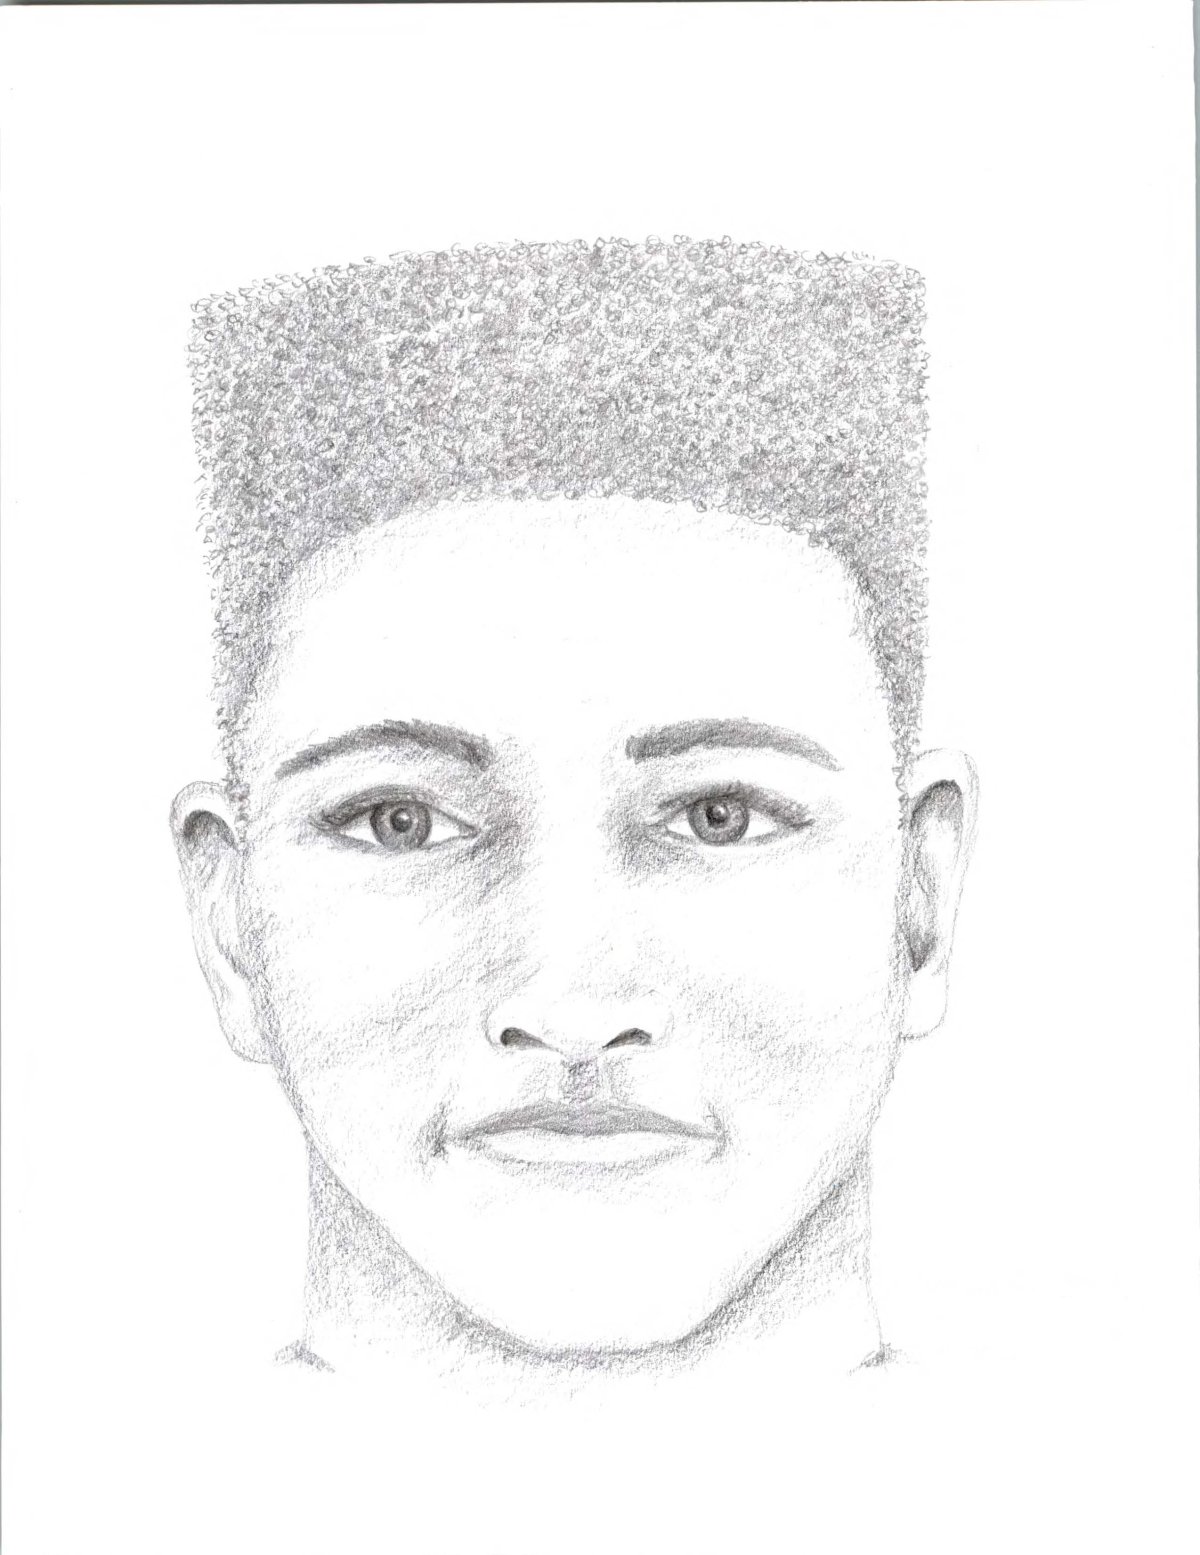 Surrey RCMP released a composite sketch of a suspect involved in a reported assault on a taxi driver.